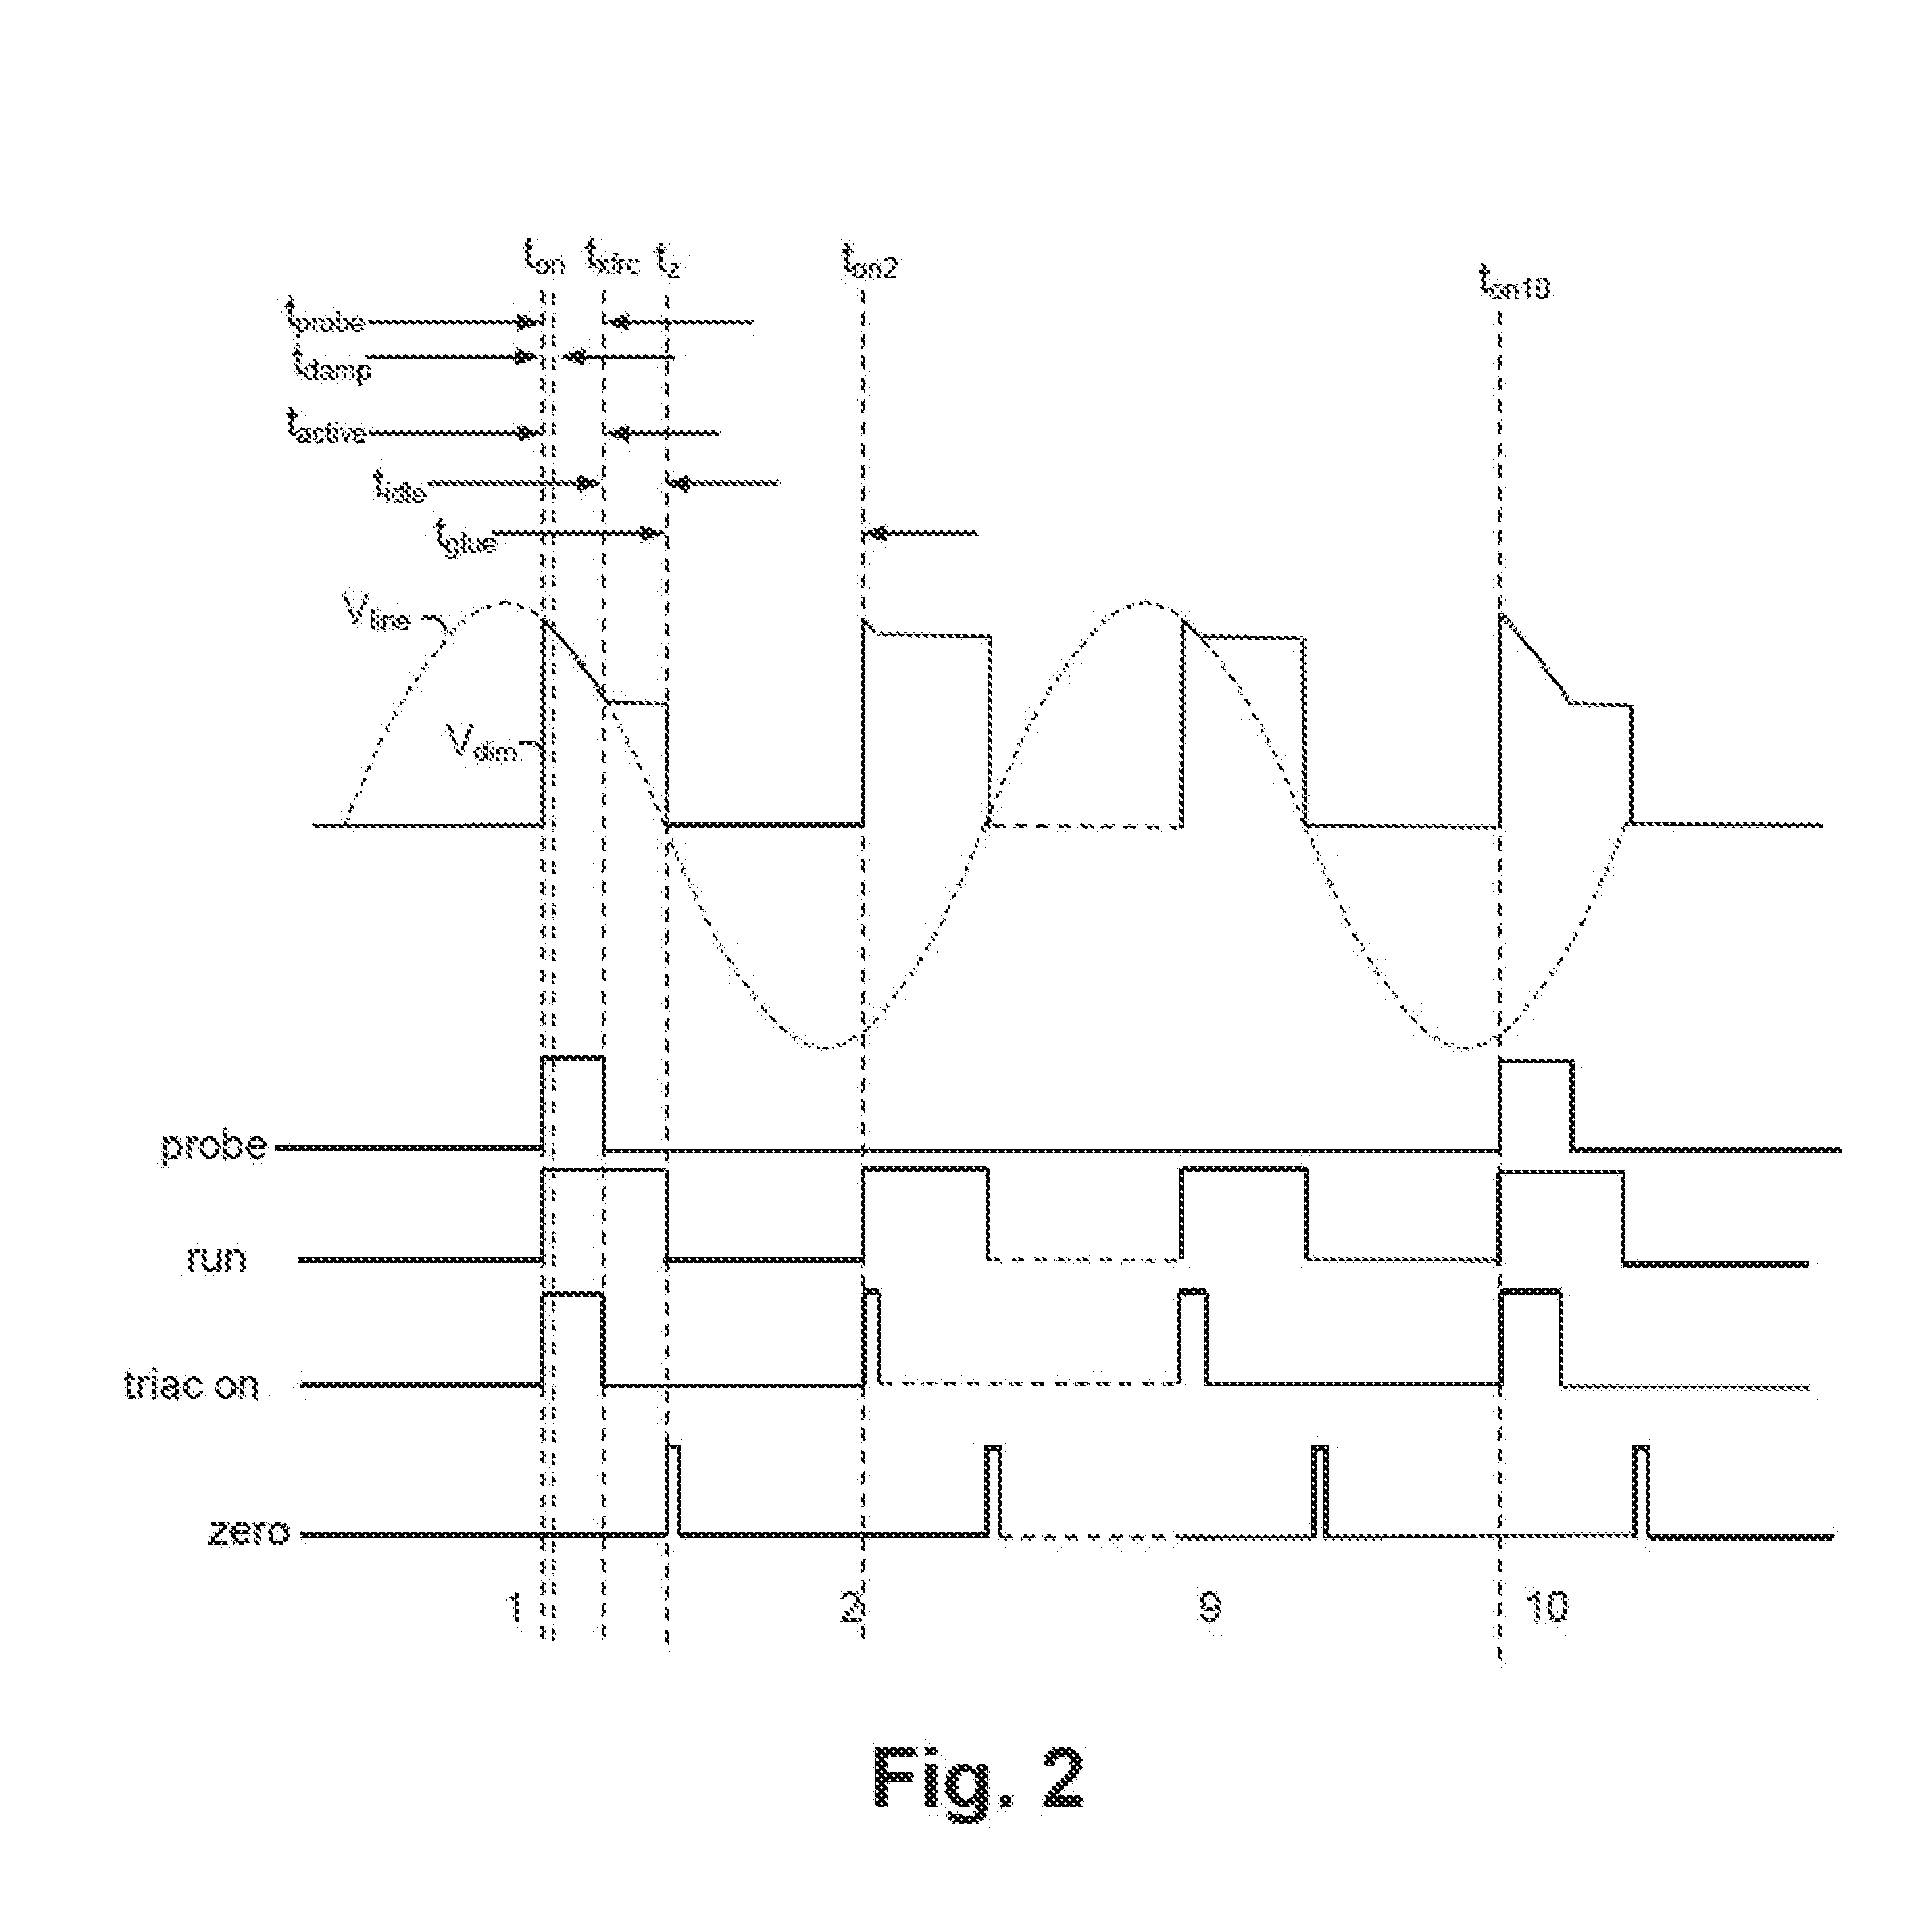 Input Voltage Sensing For A Switching Power Converter And A Triac-Based Dimmer